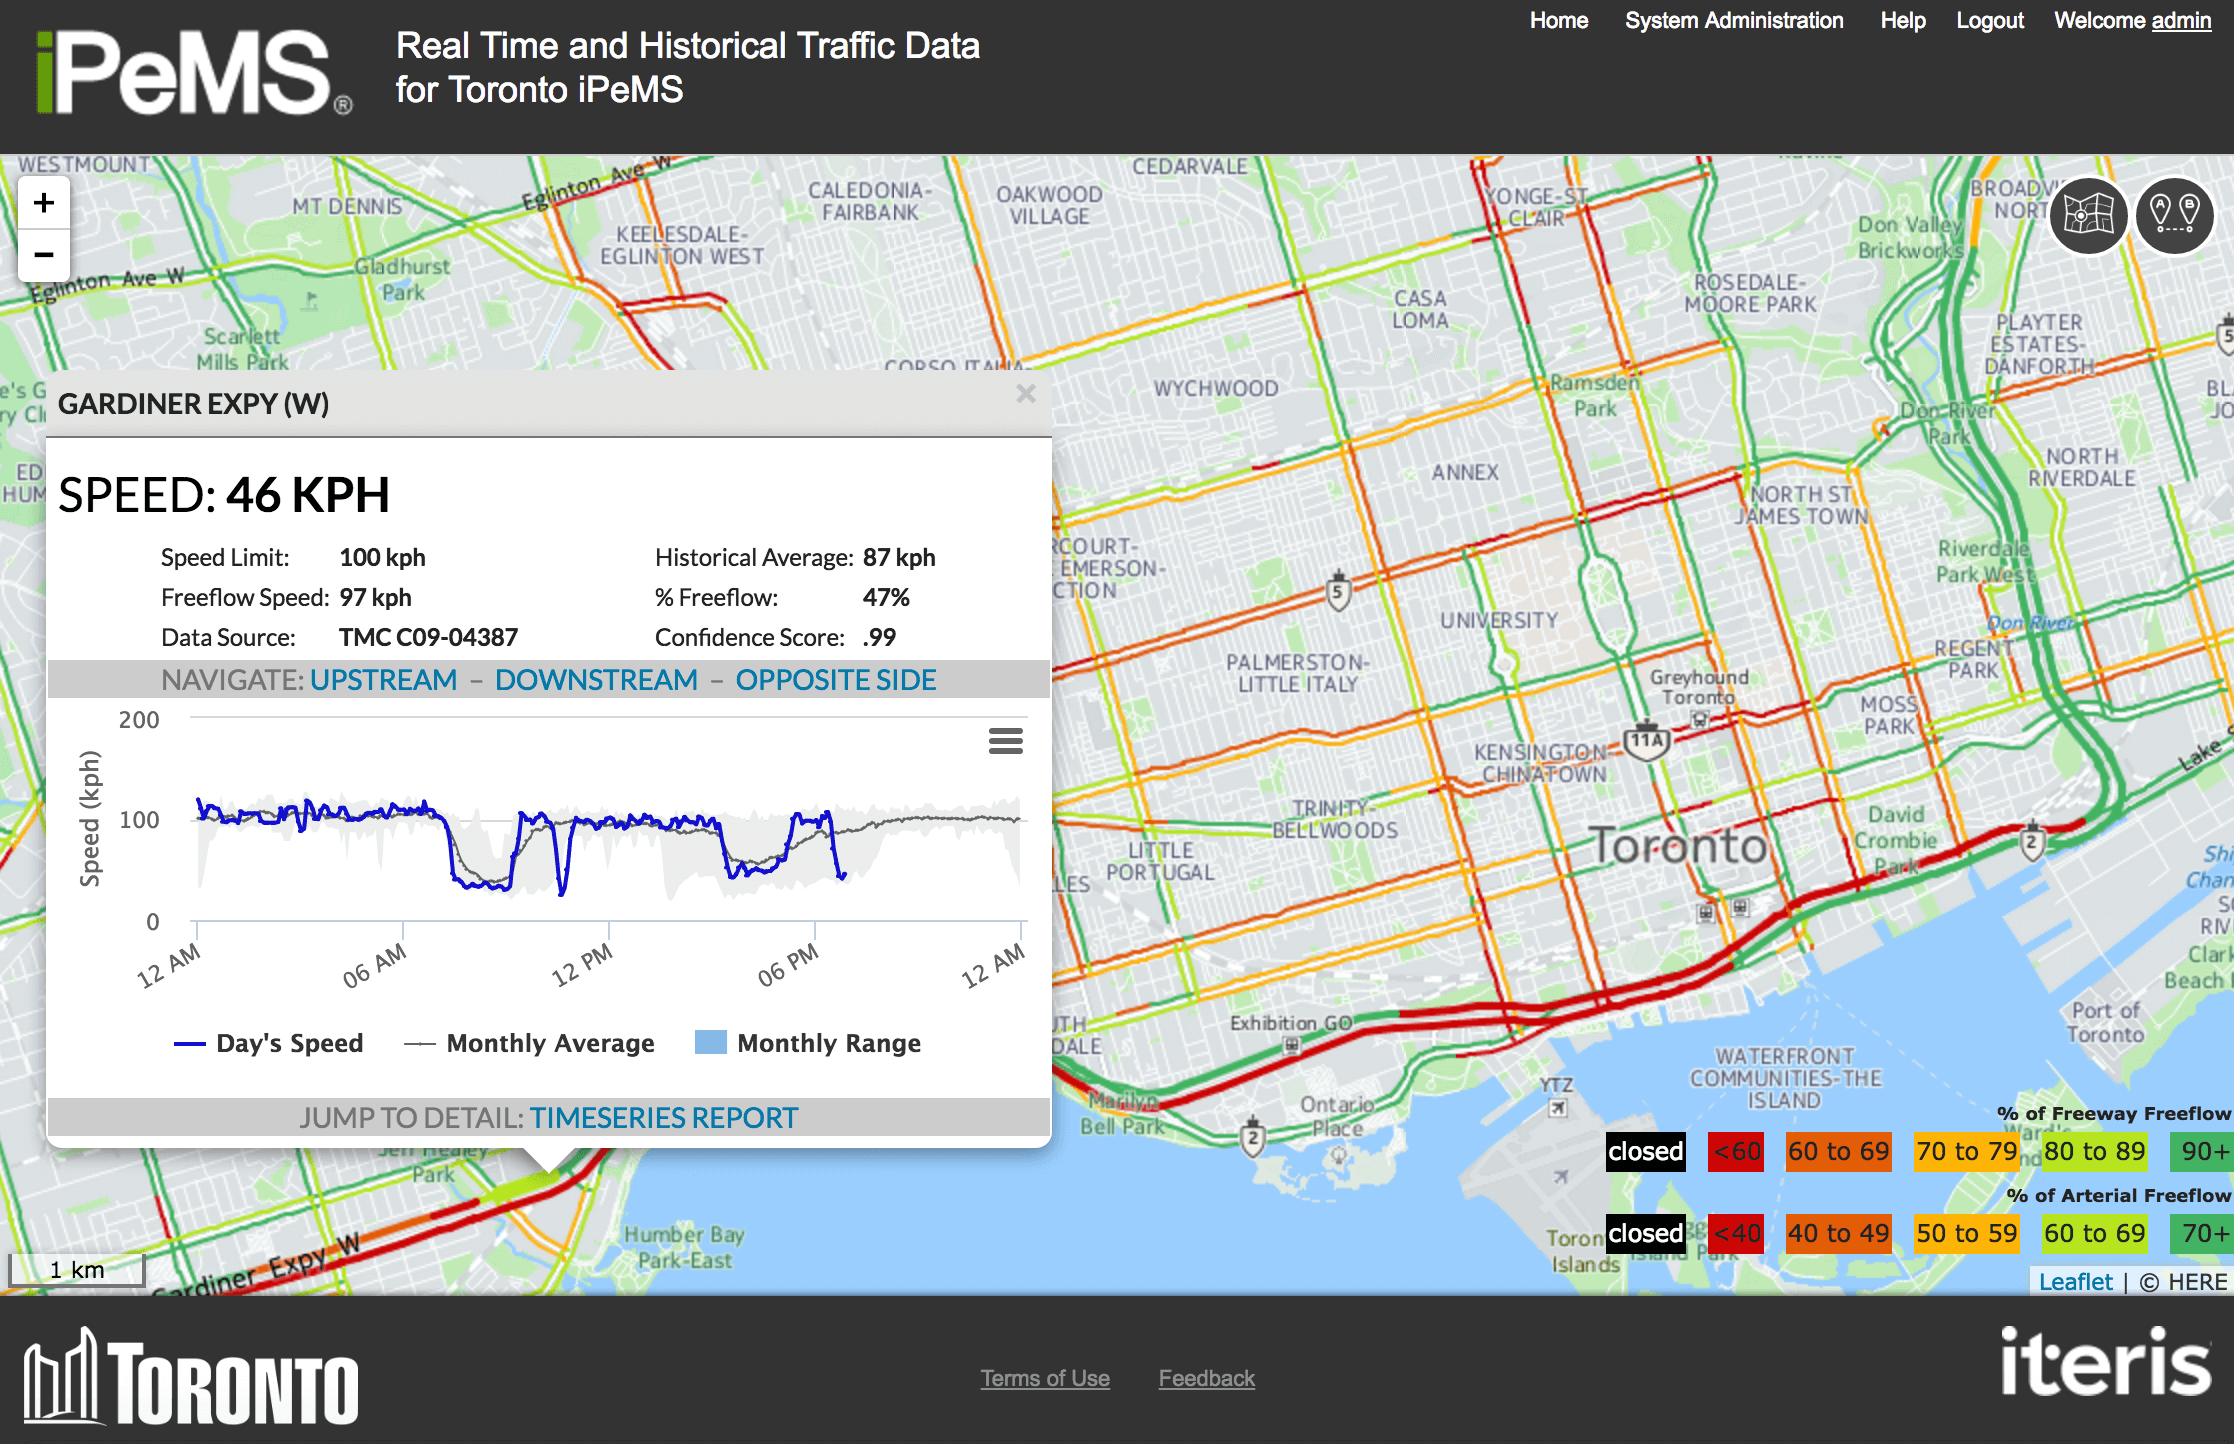 Real-time and historical Toronto traffic data visualization via Iteris iPeMS 9 May, 2017 (Source: Iteris).